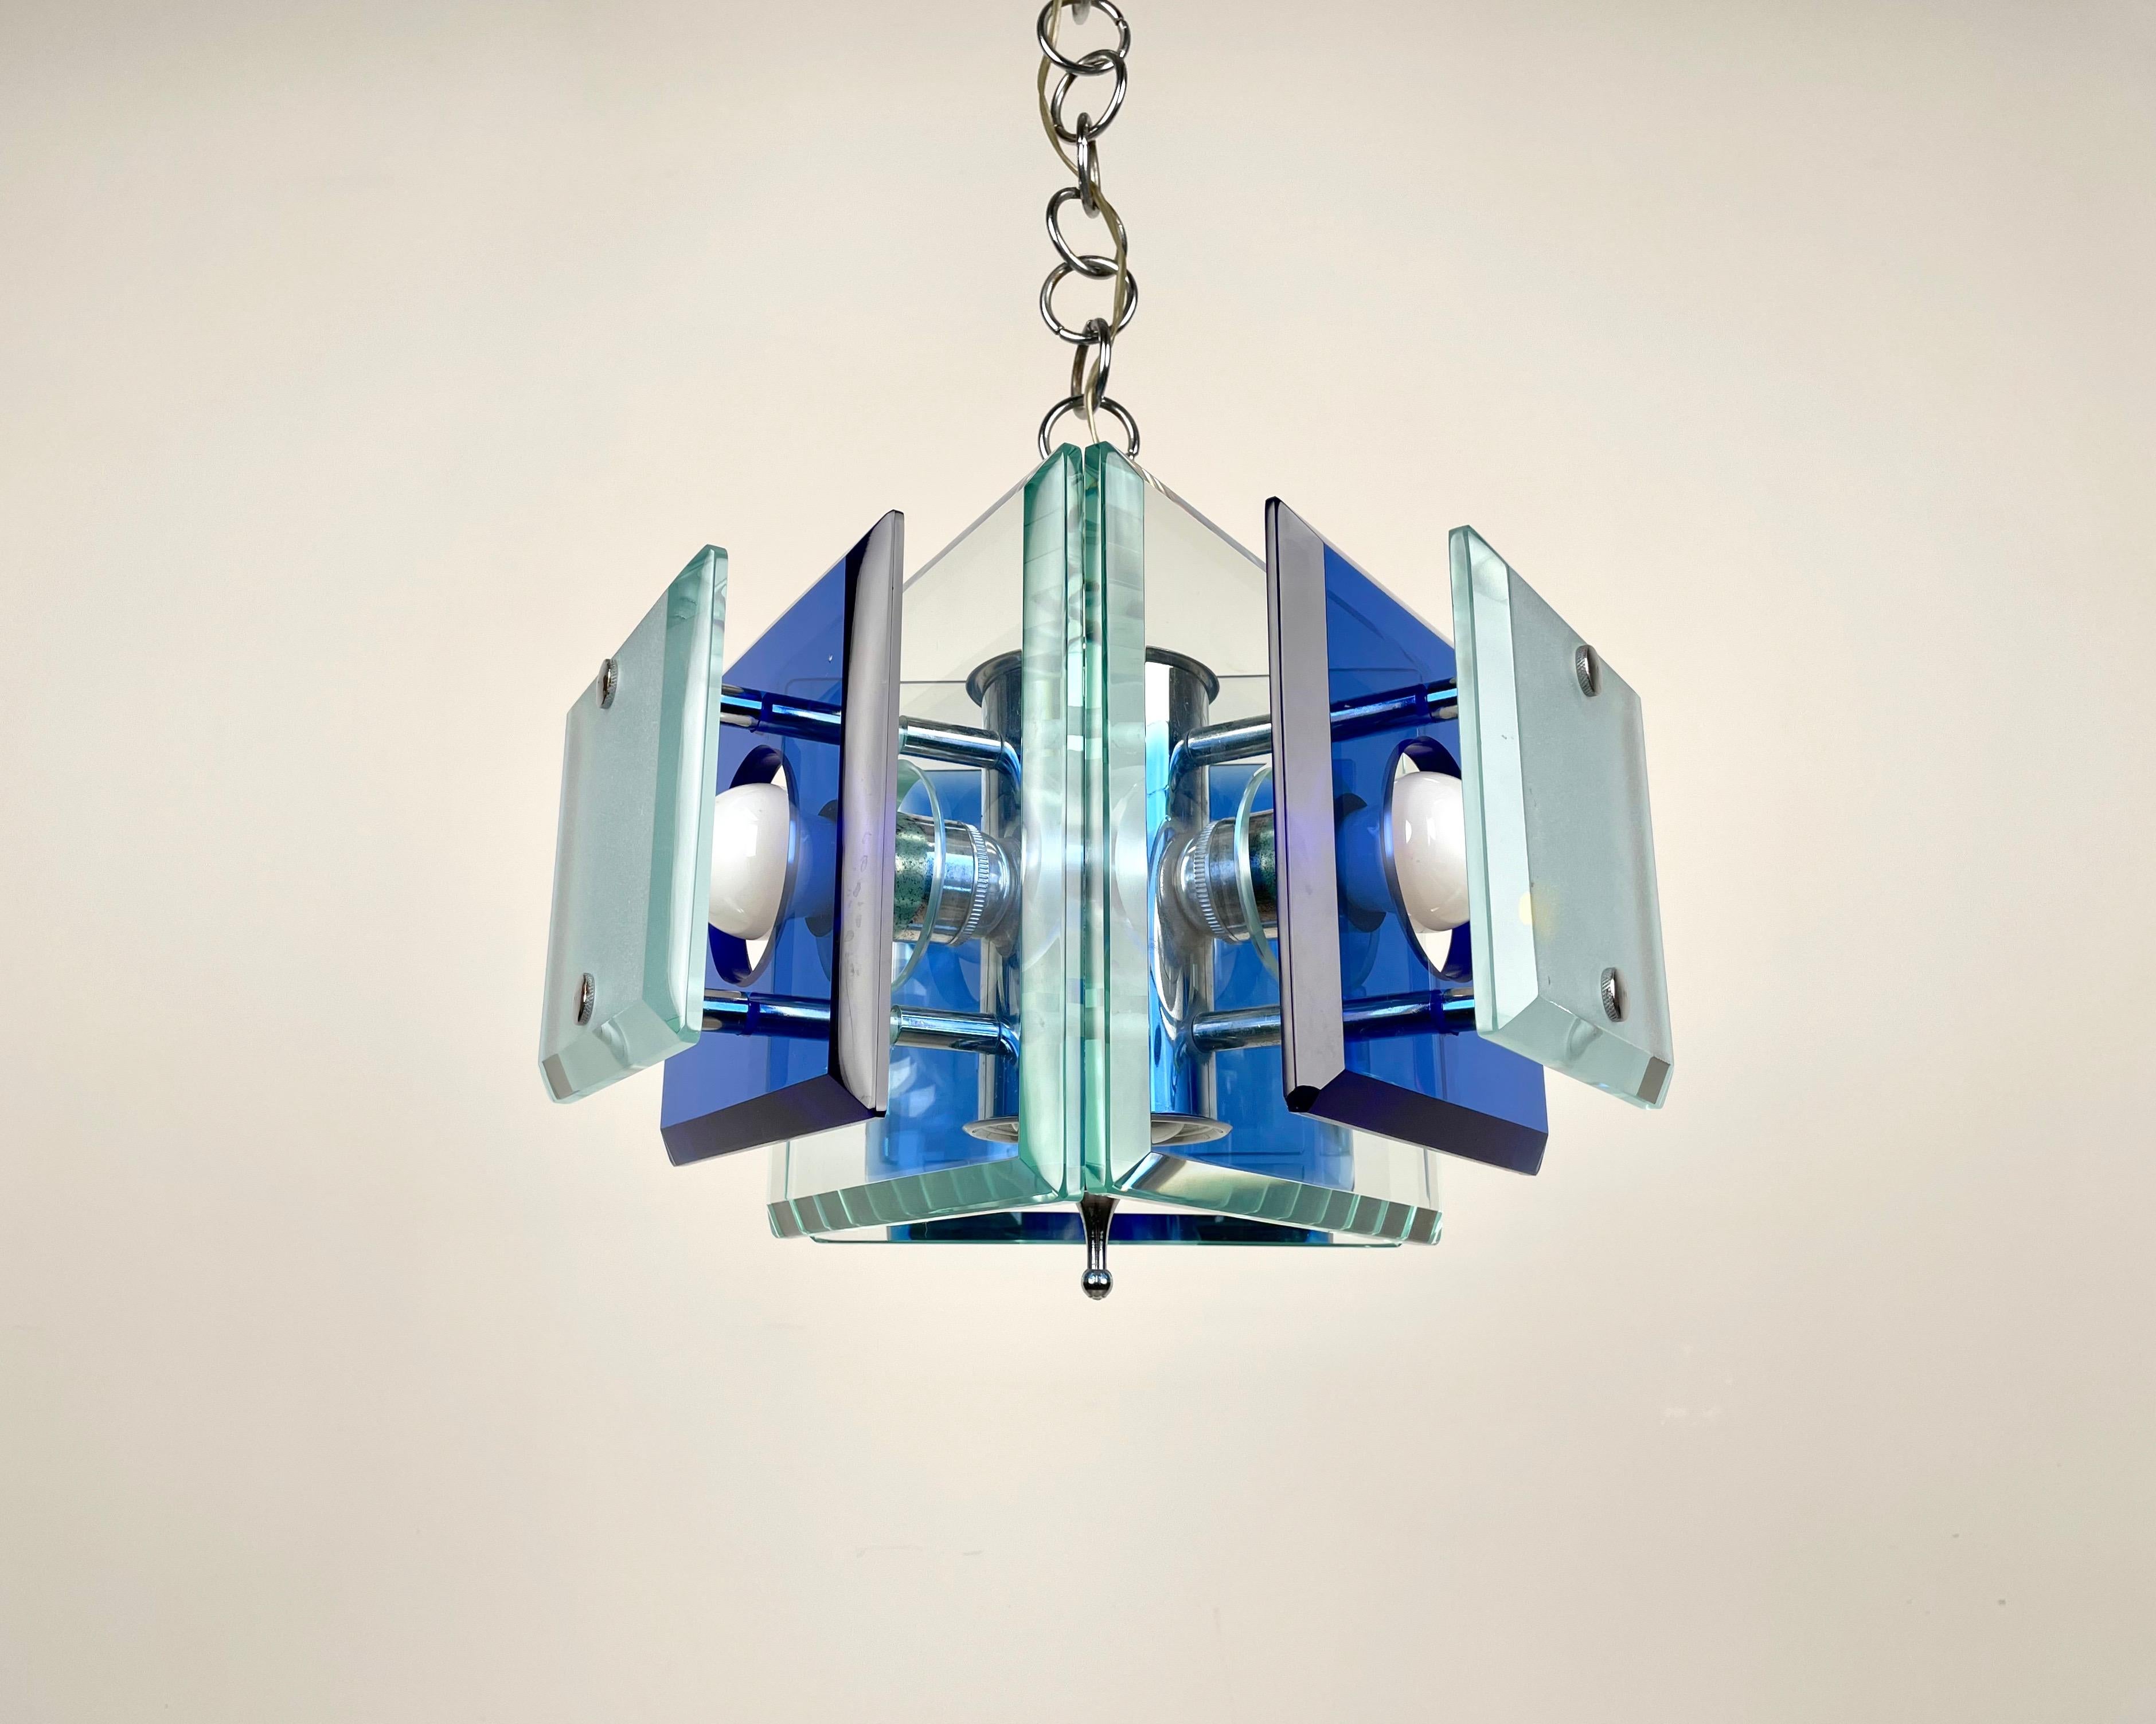 Lupi Cristal Luxor Blue Glass and Chrome Chandelier, Italy, 1970s For Sale 3